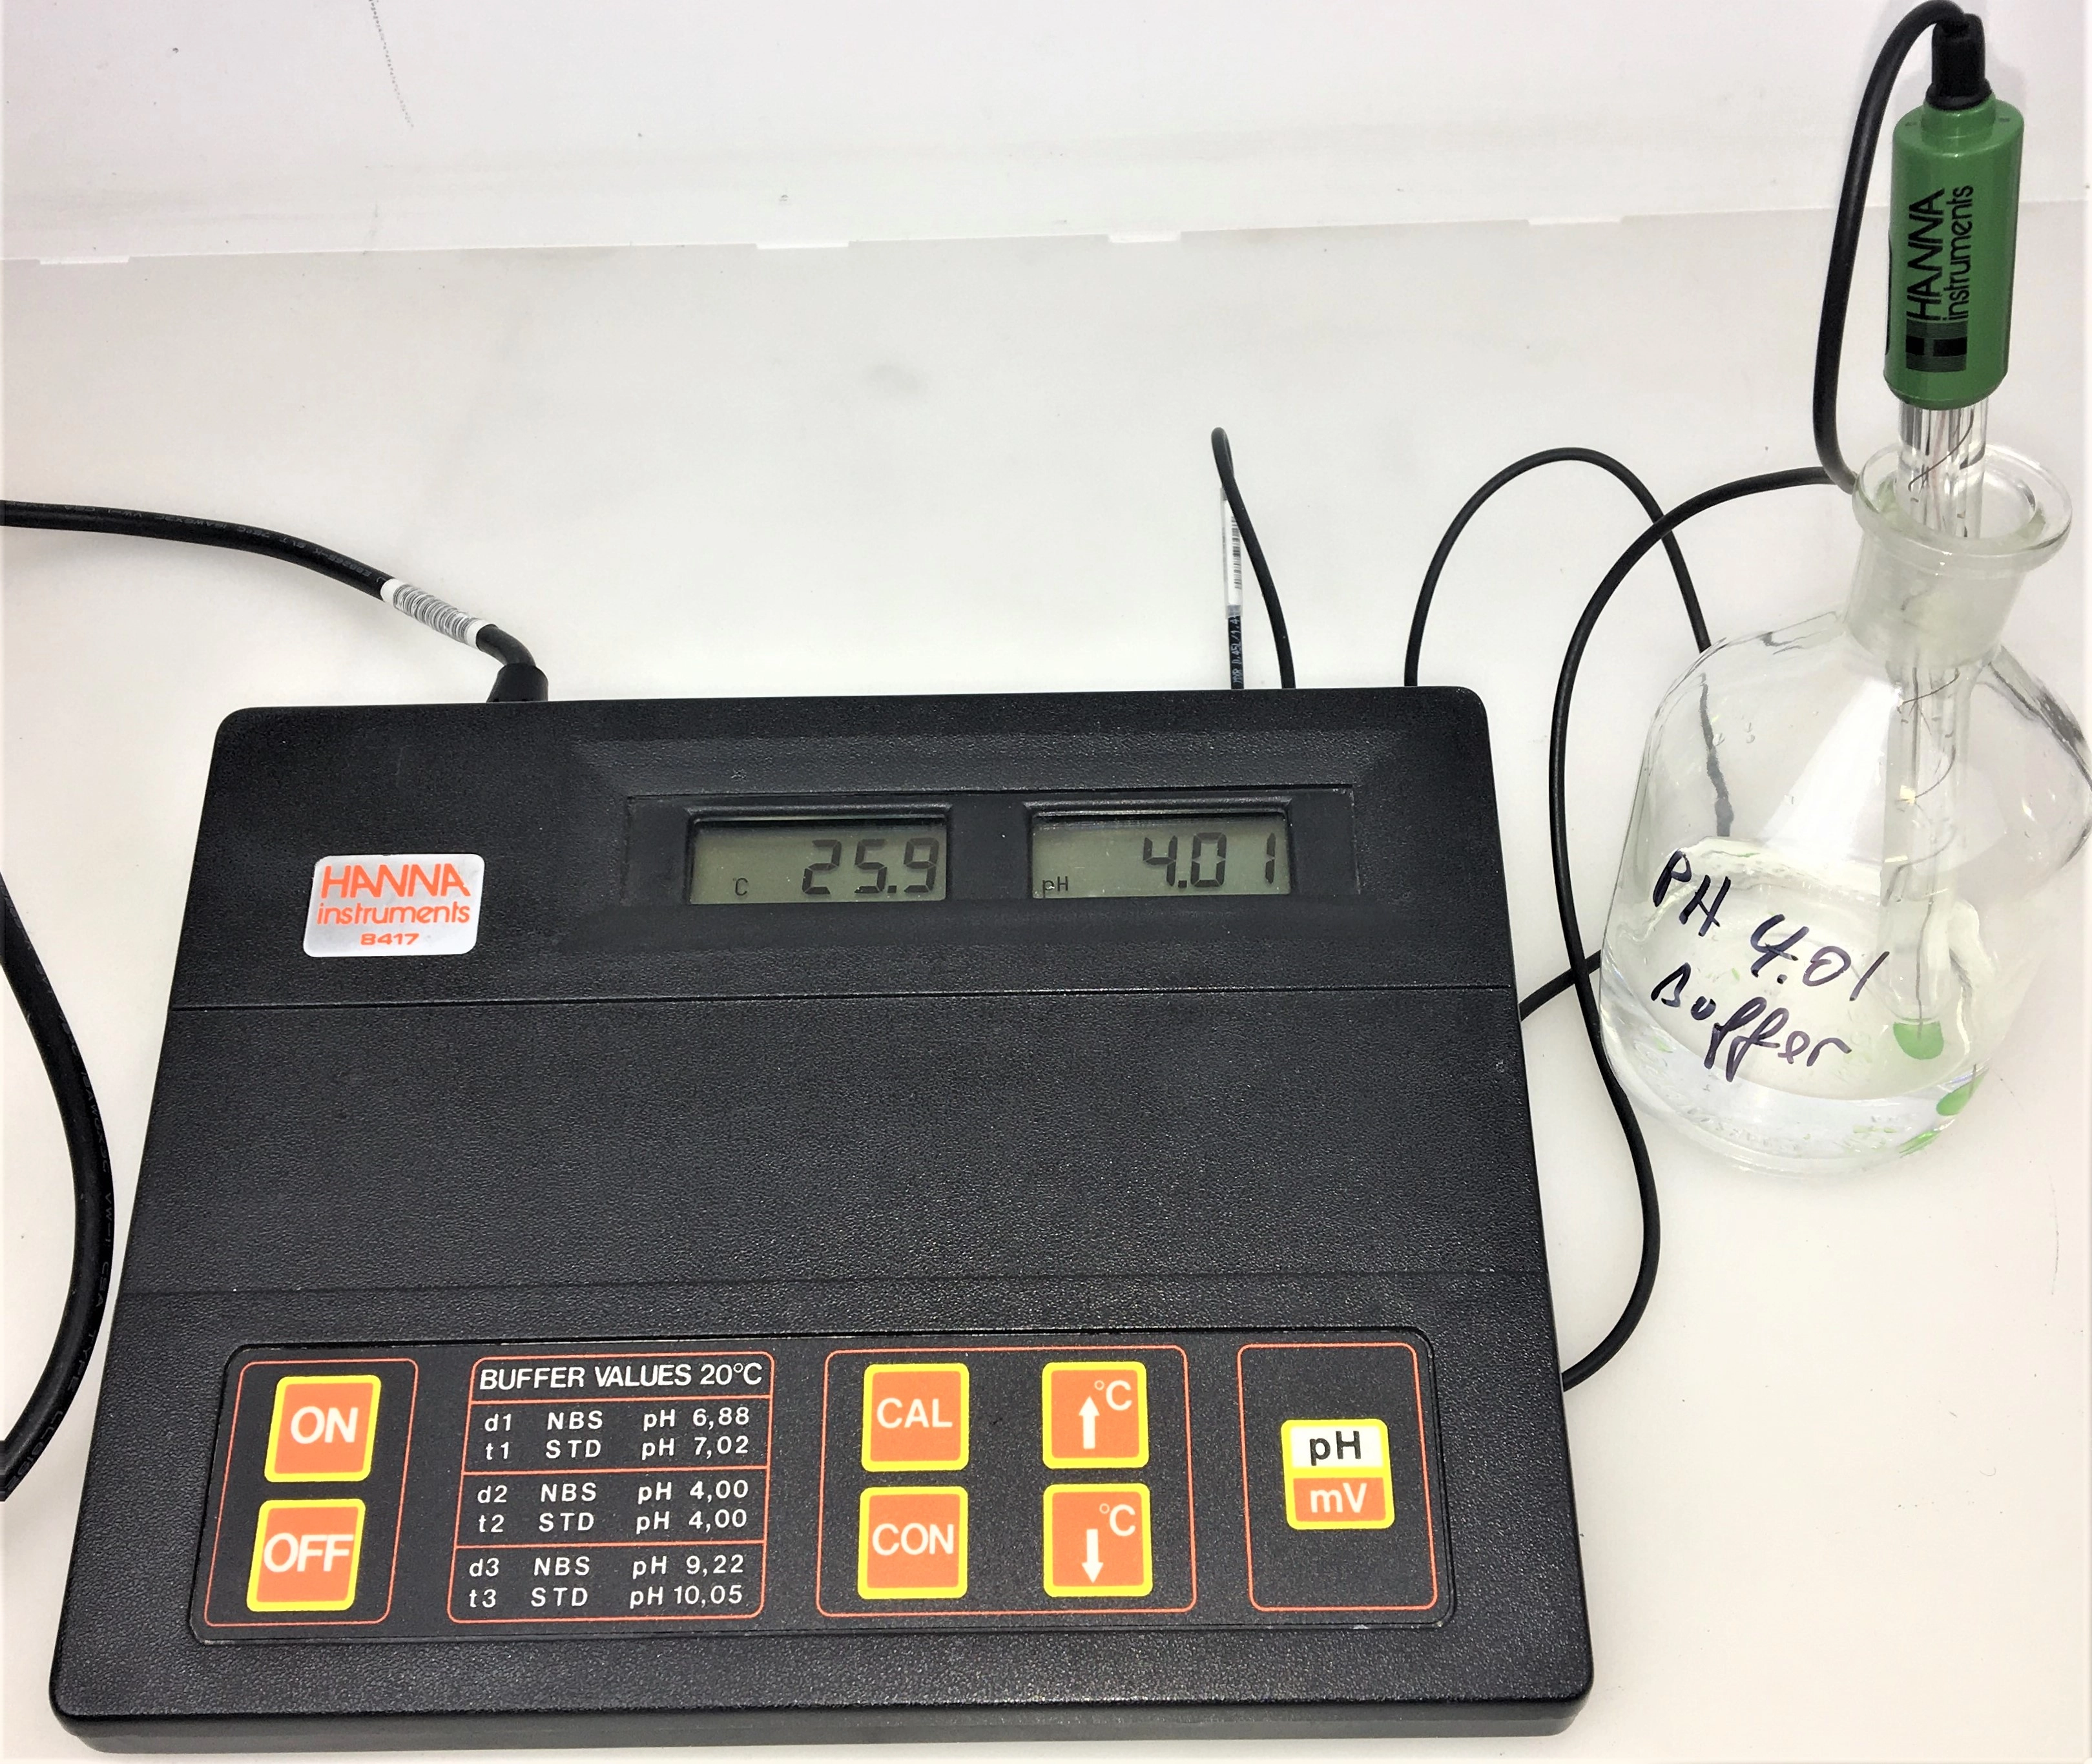 Hanna HI 8417 Benchtop pH-ISE Meter with New Electrode